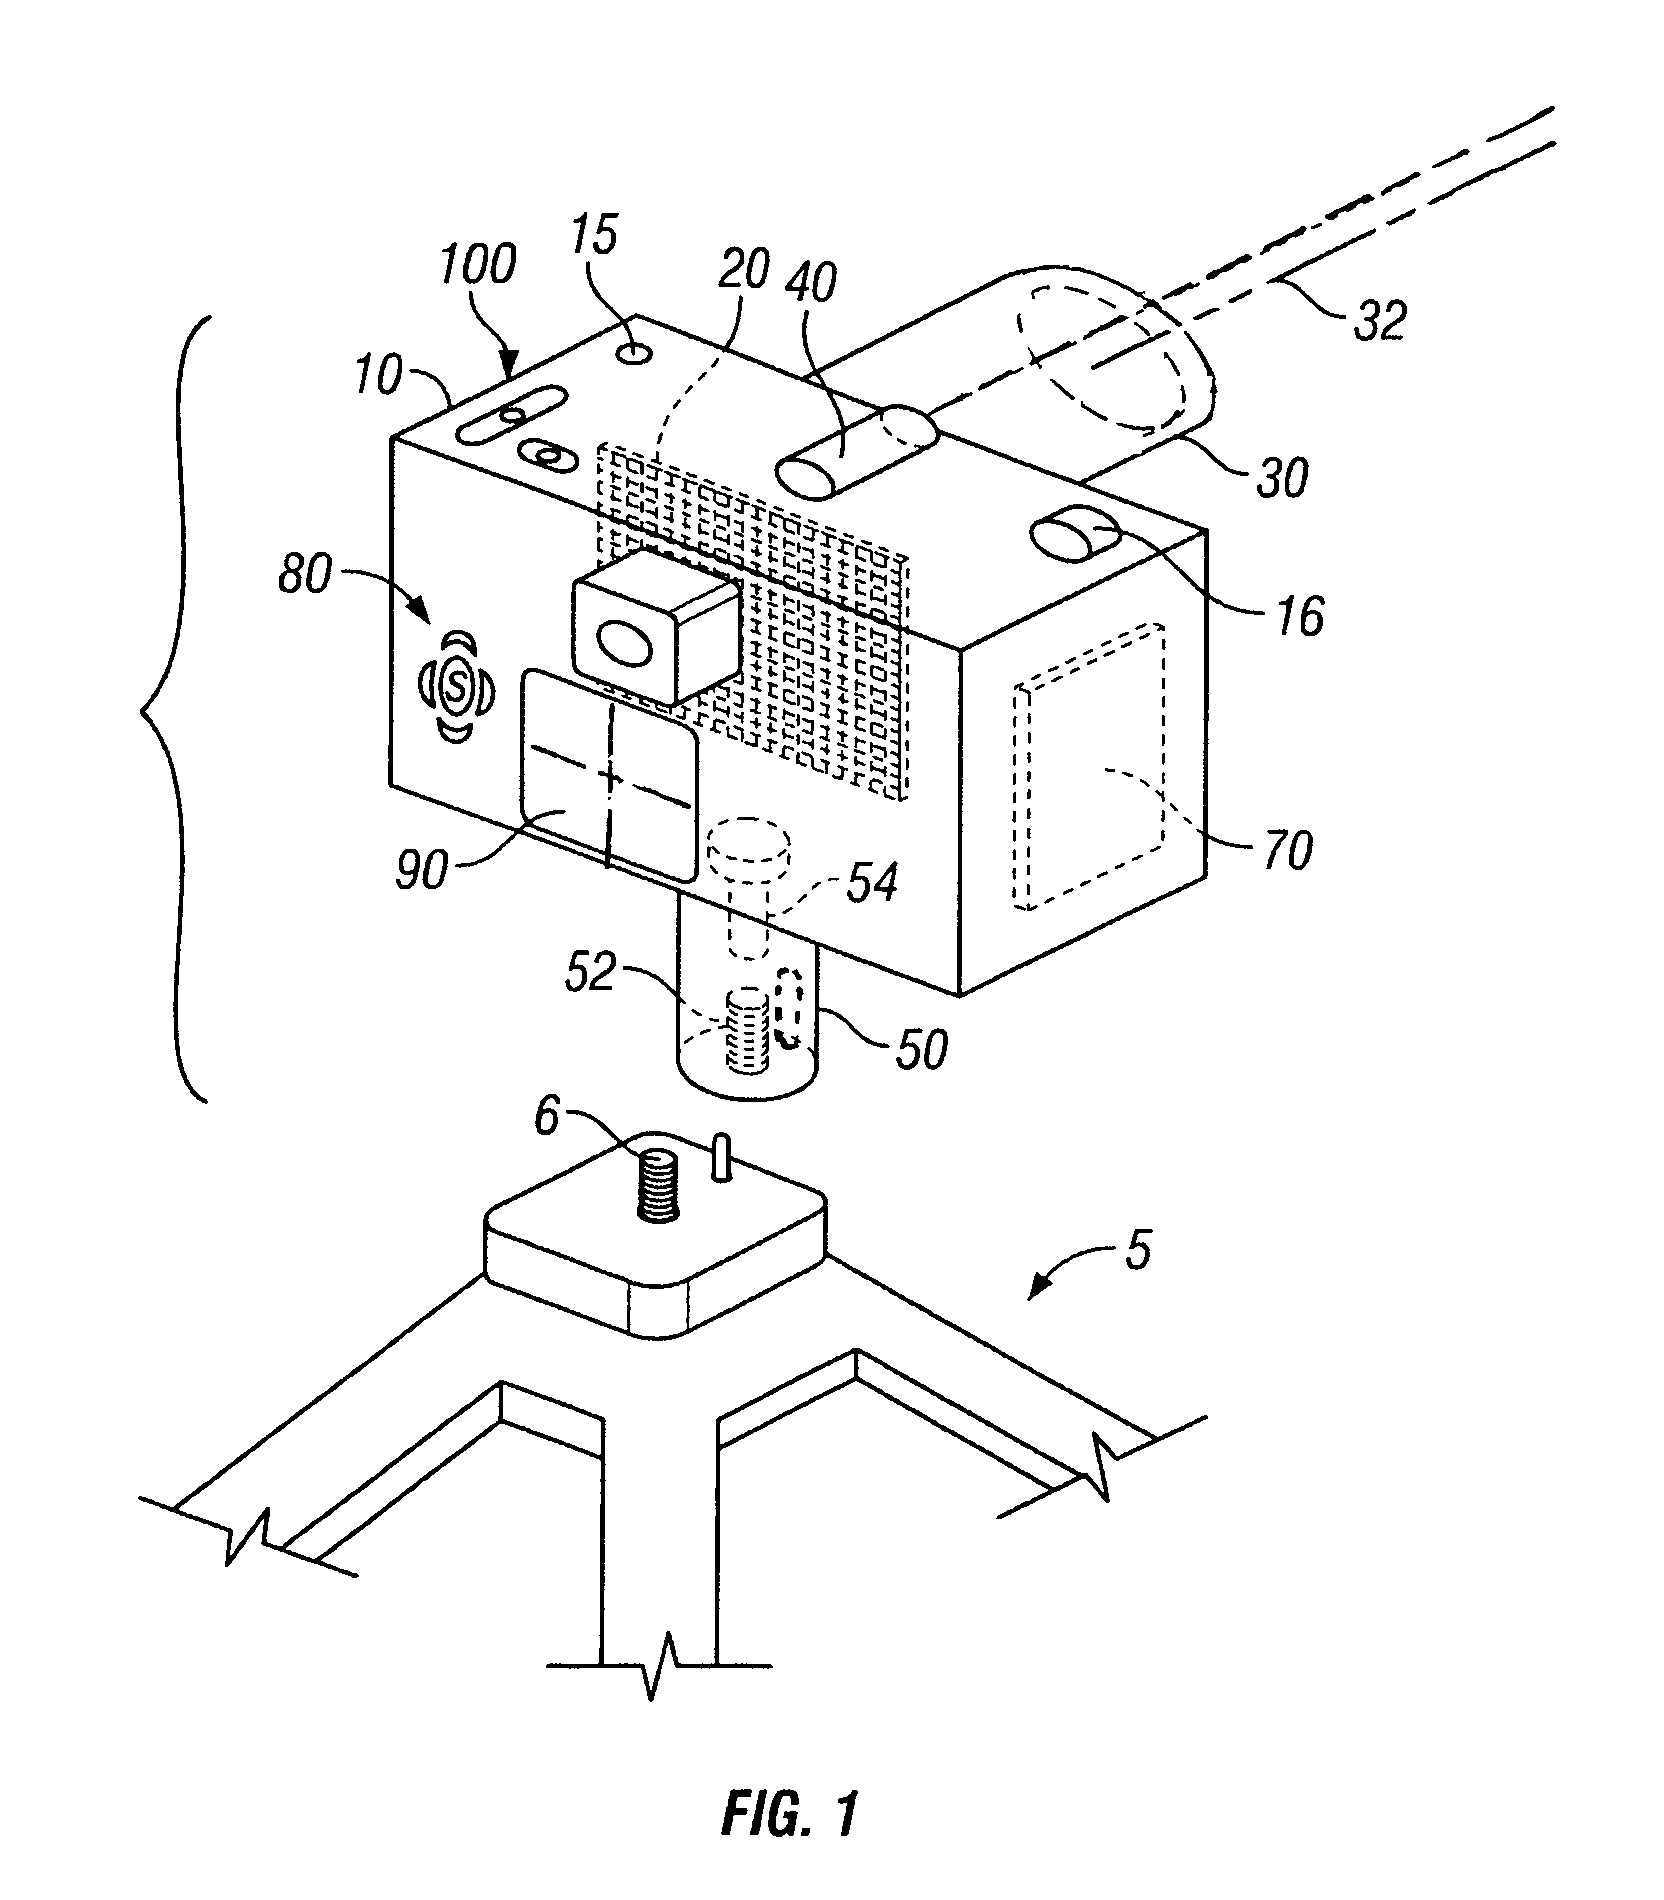 Method and apparatus for photographic measurement